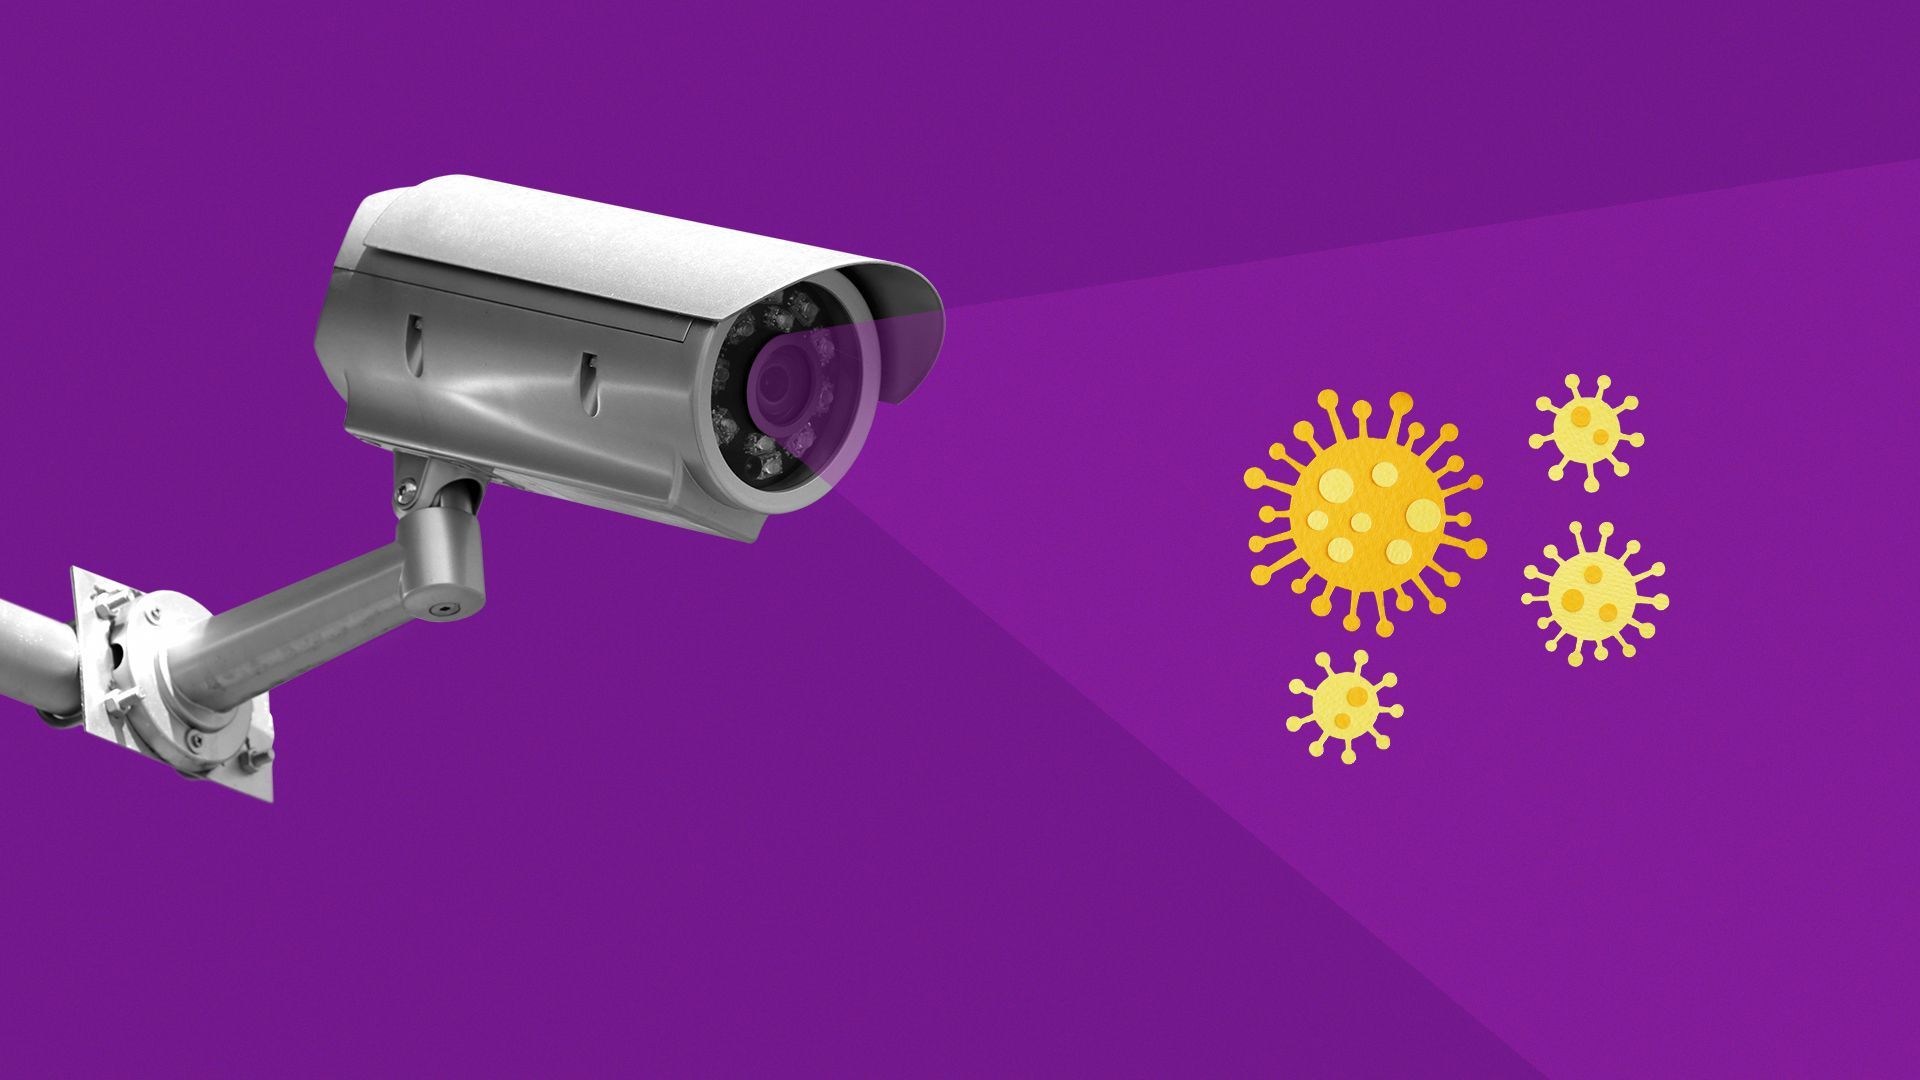 Illustration of a security camera focused on several virus molecules.